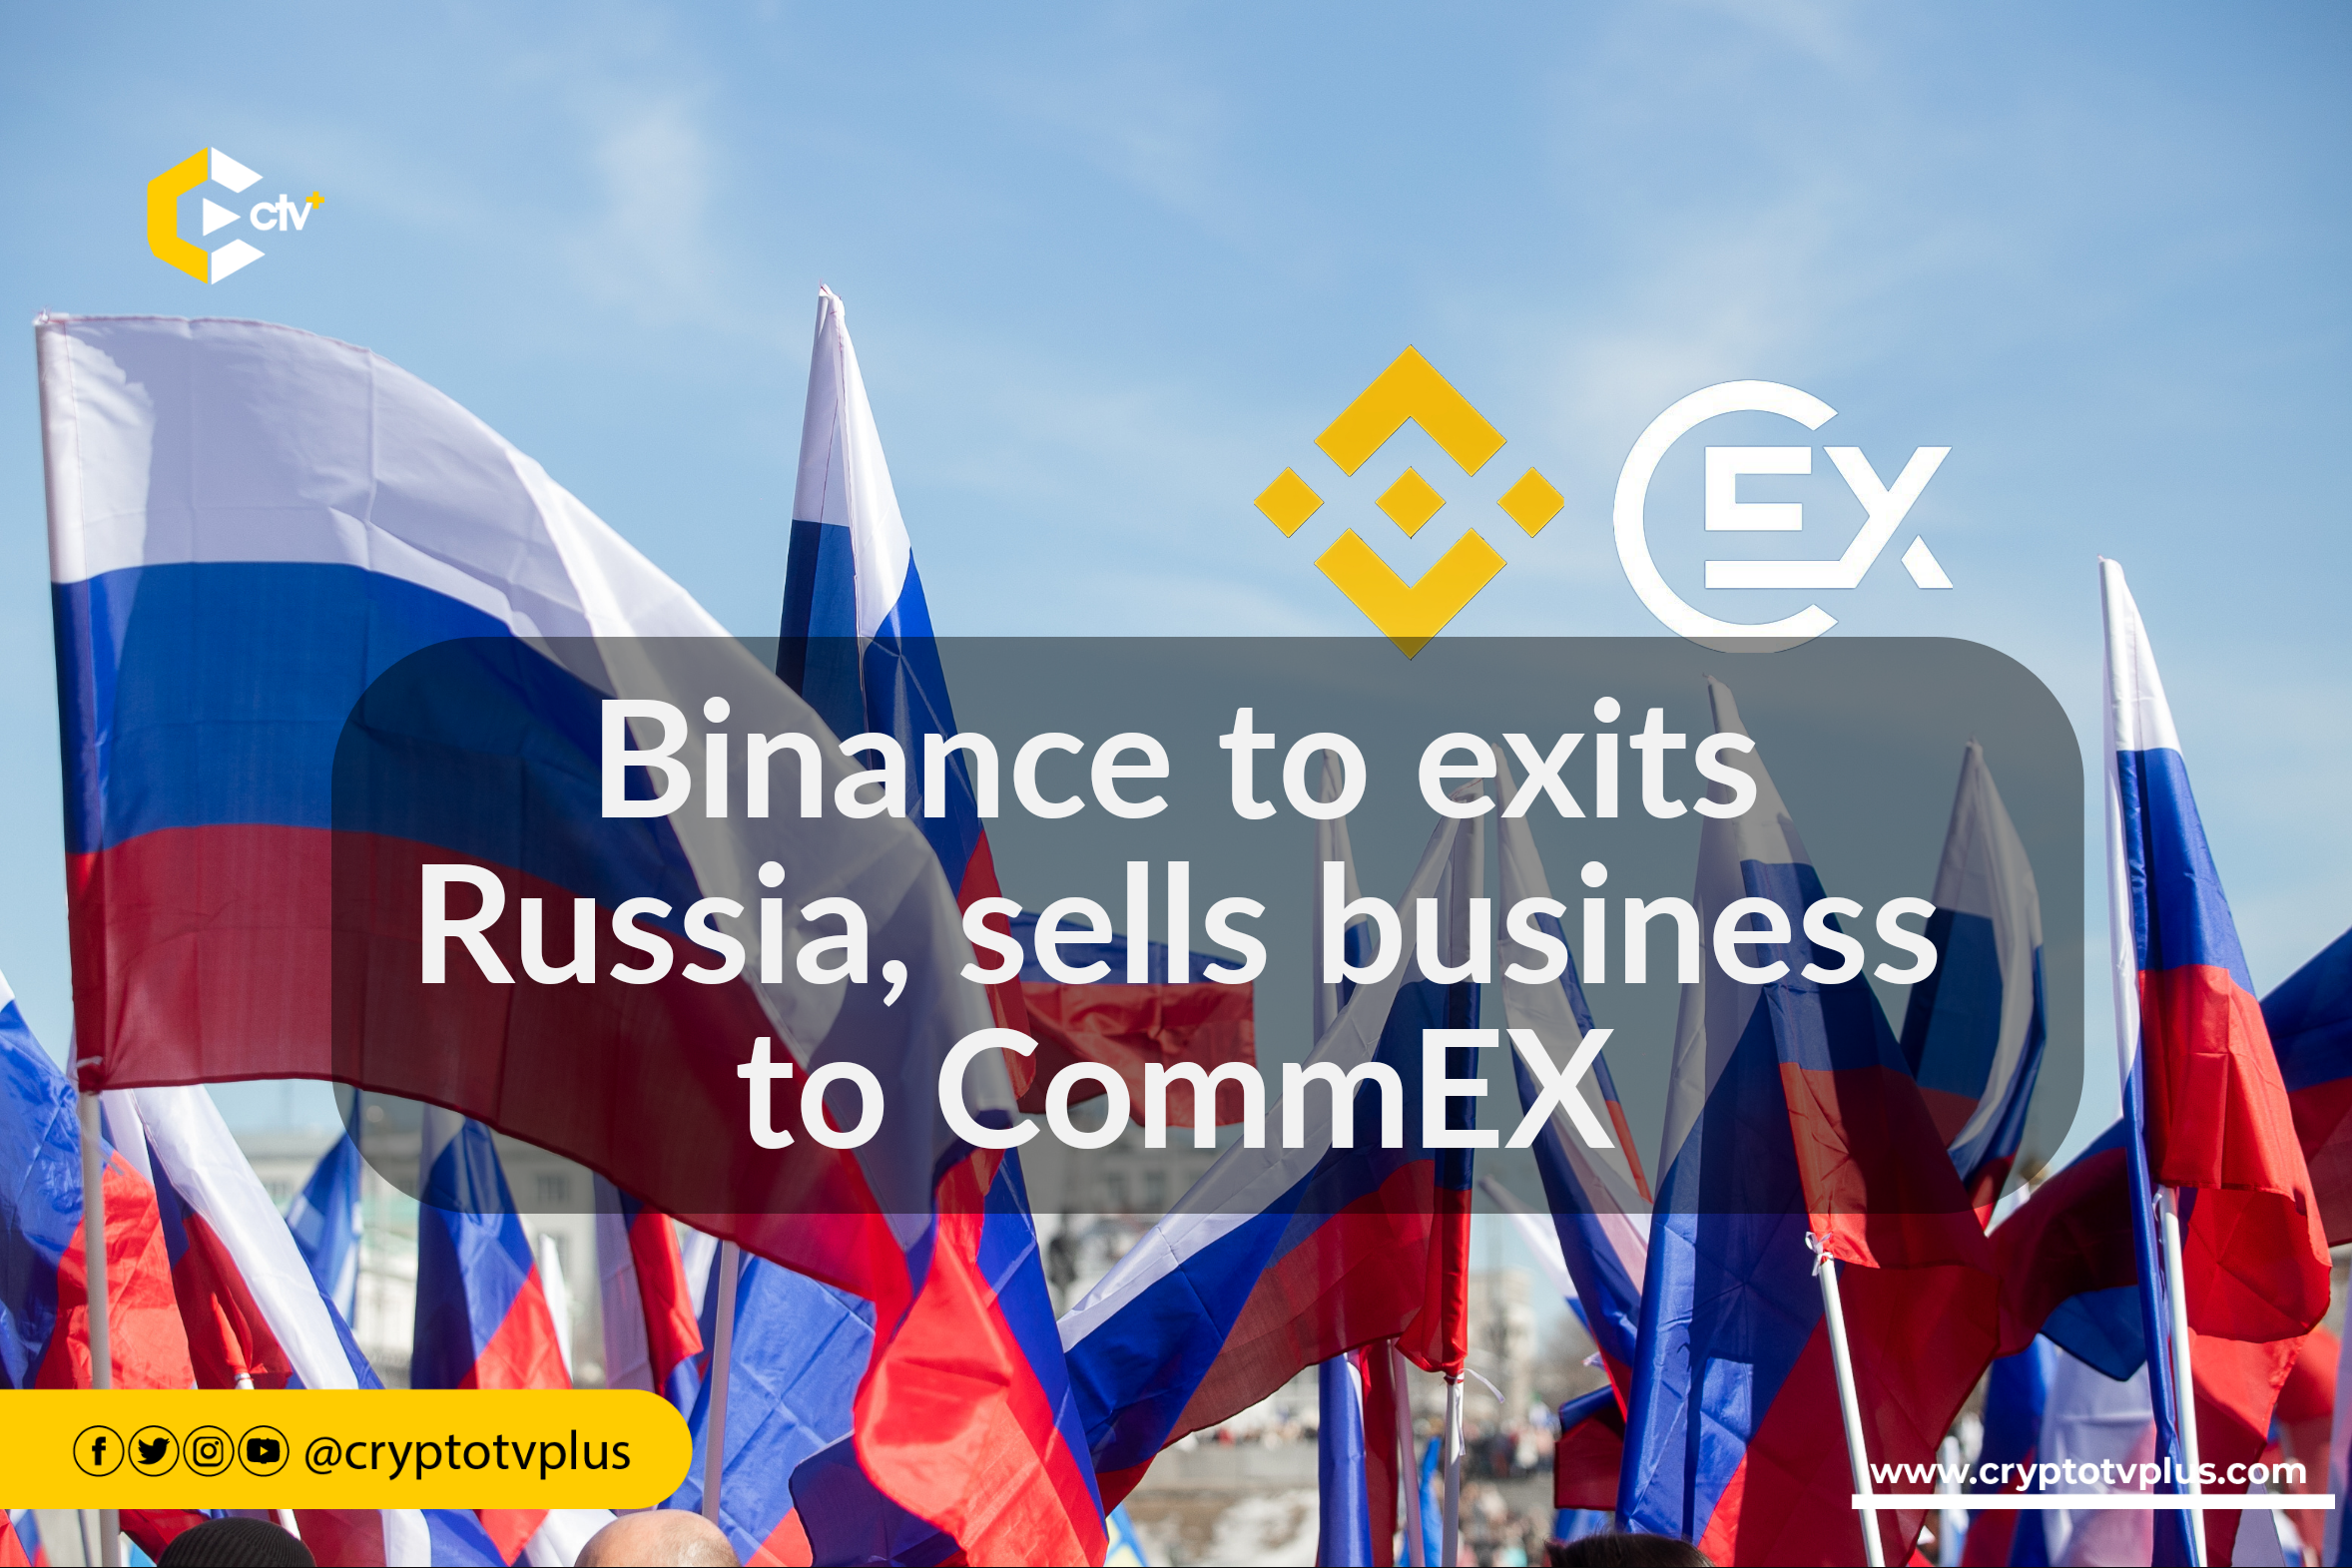 Binance announces withdrawal from the Russian market and sells operations to CommEX. User migration process explained. Learn more.